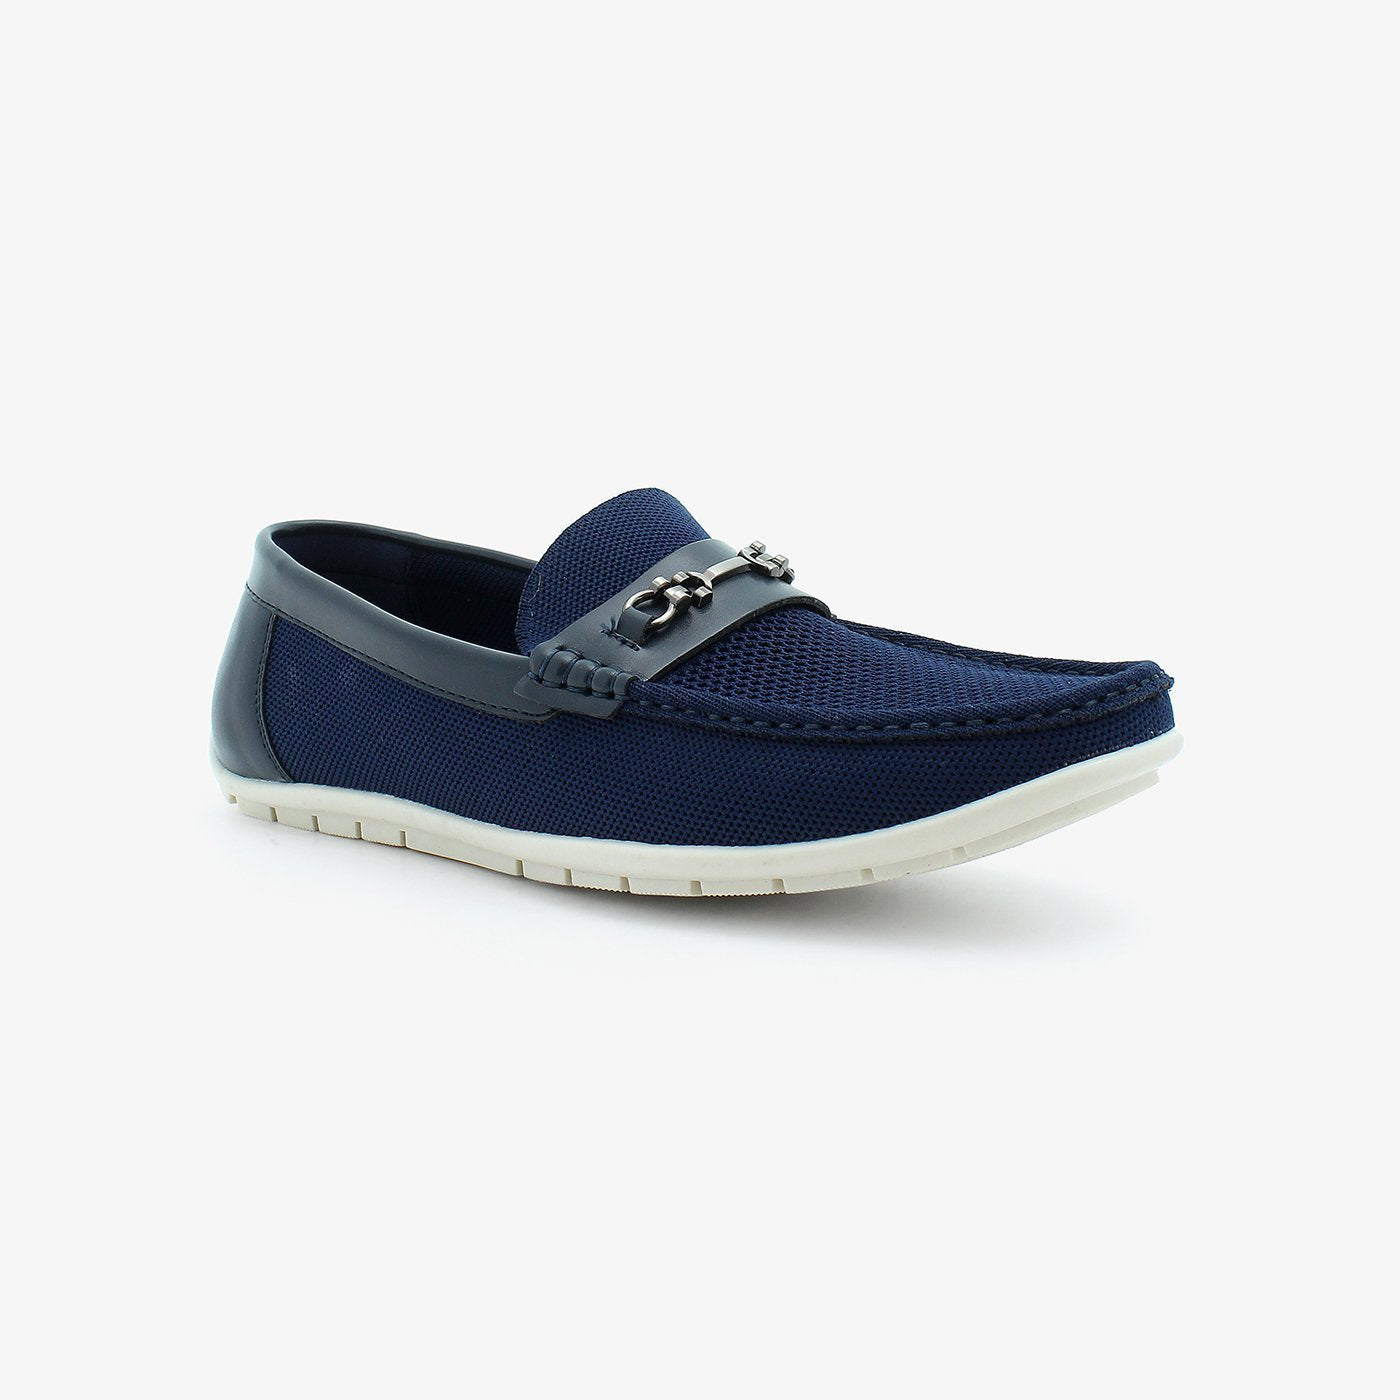 Classic Mens Loafer